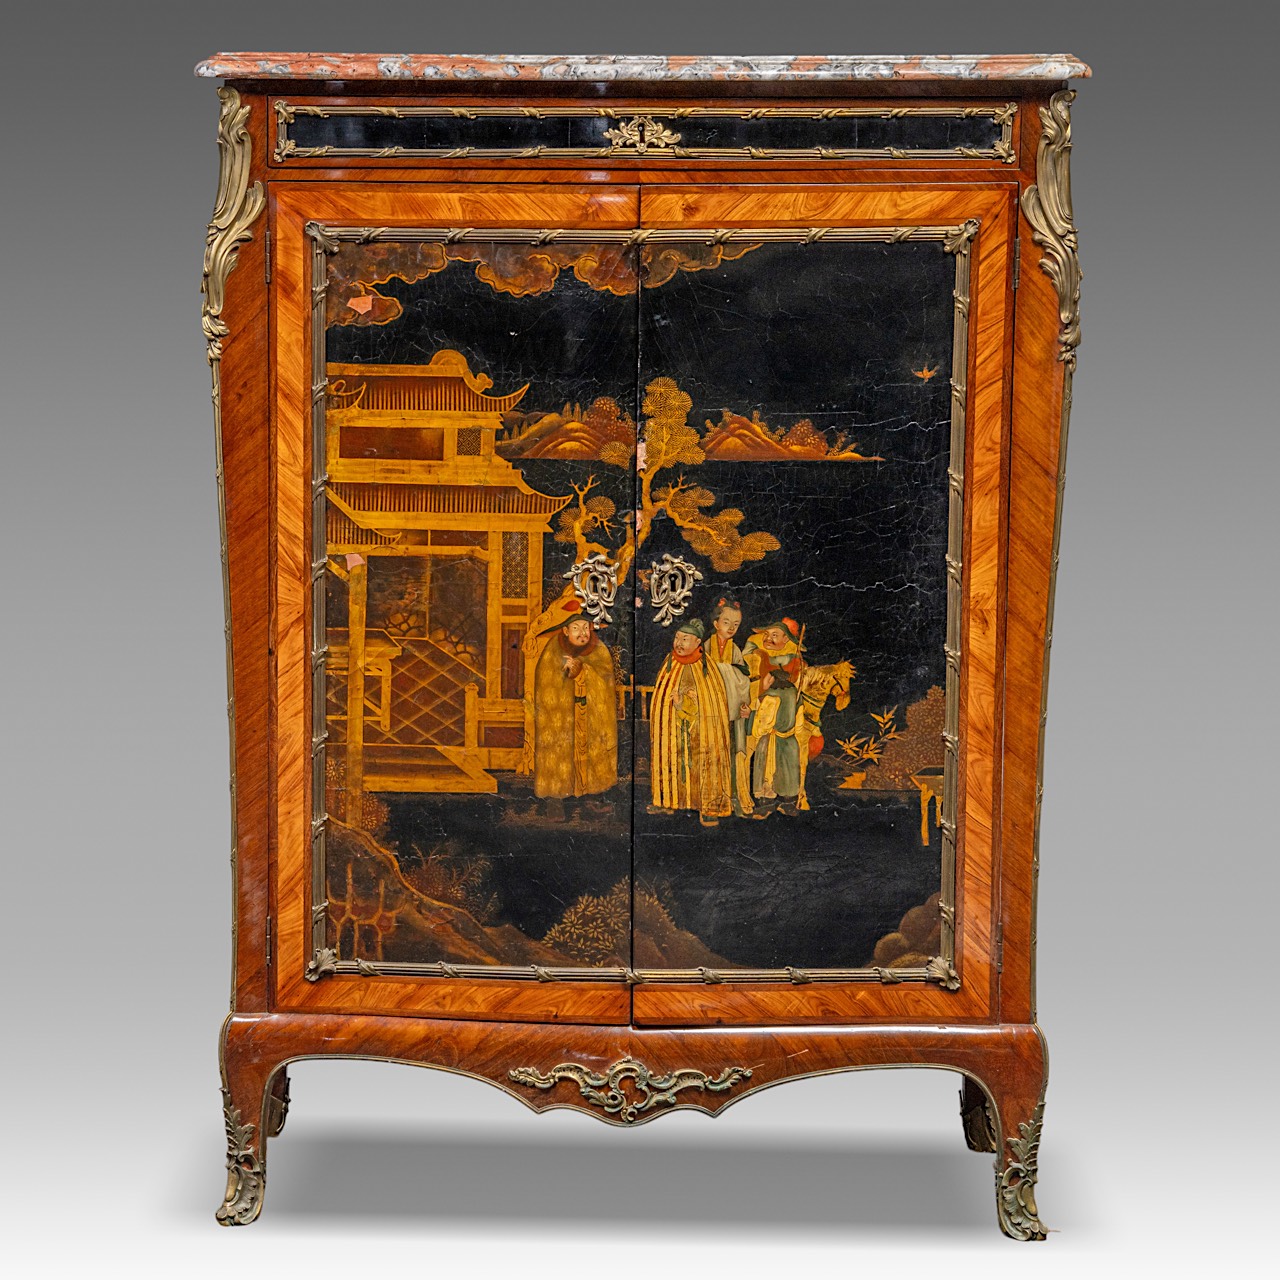 A marble-topped Louis XV (1723-1774) chinoiserie lacquered cabinet, H0125 cm - W 92 cm - D 47,5 cm - Image 3 of 8